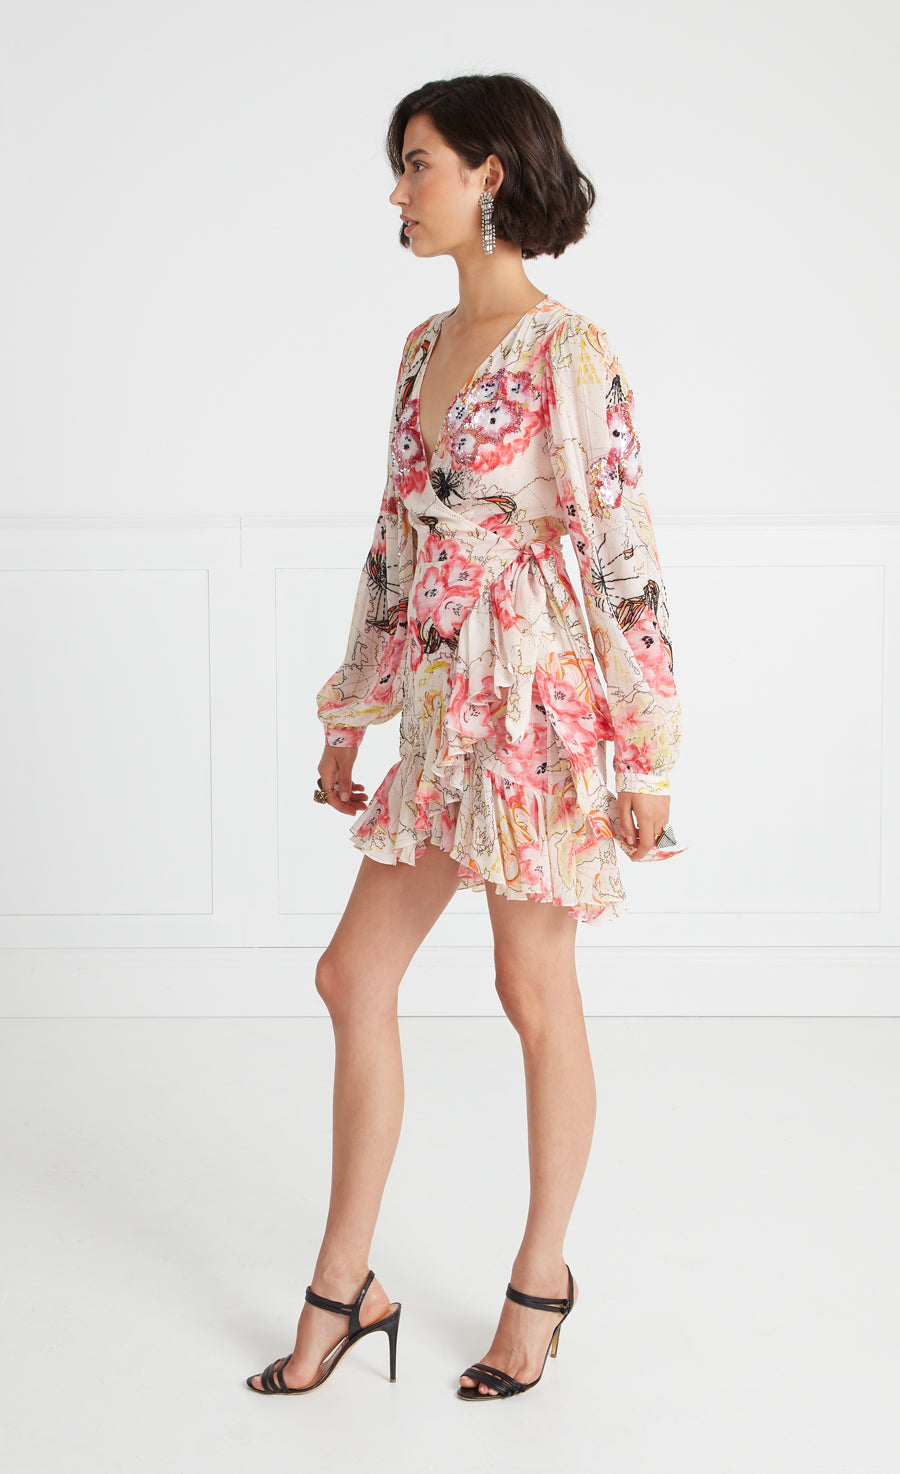 All Products | Luxury & Exclusive Designs – Temperley London (UK)